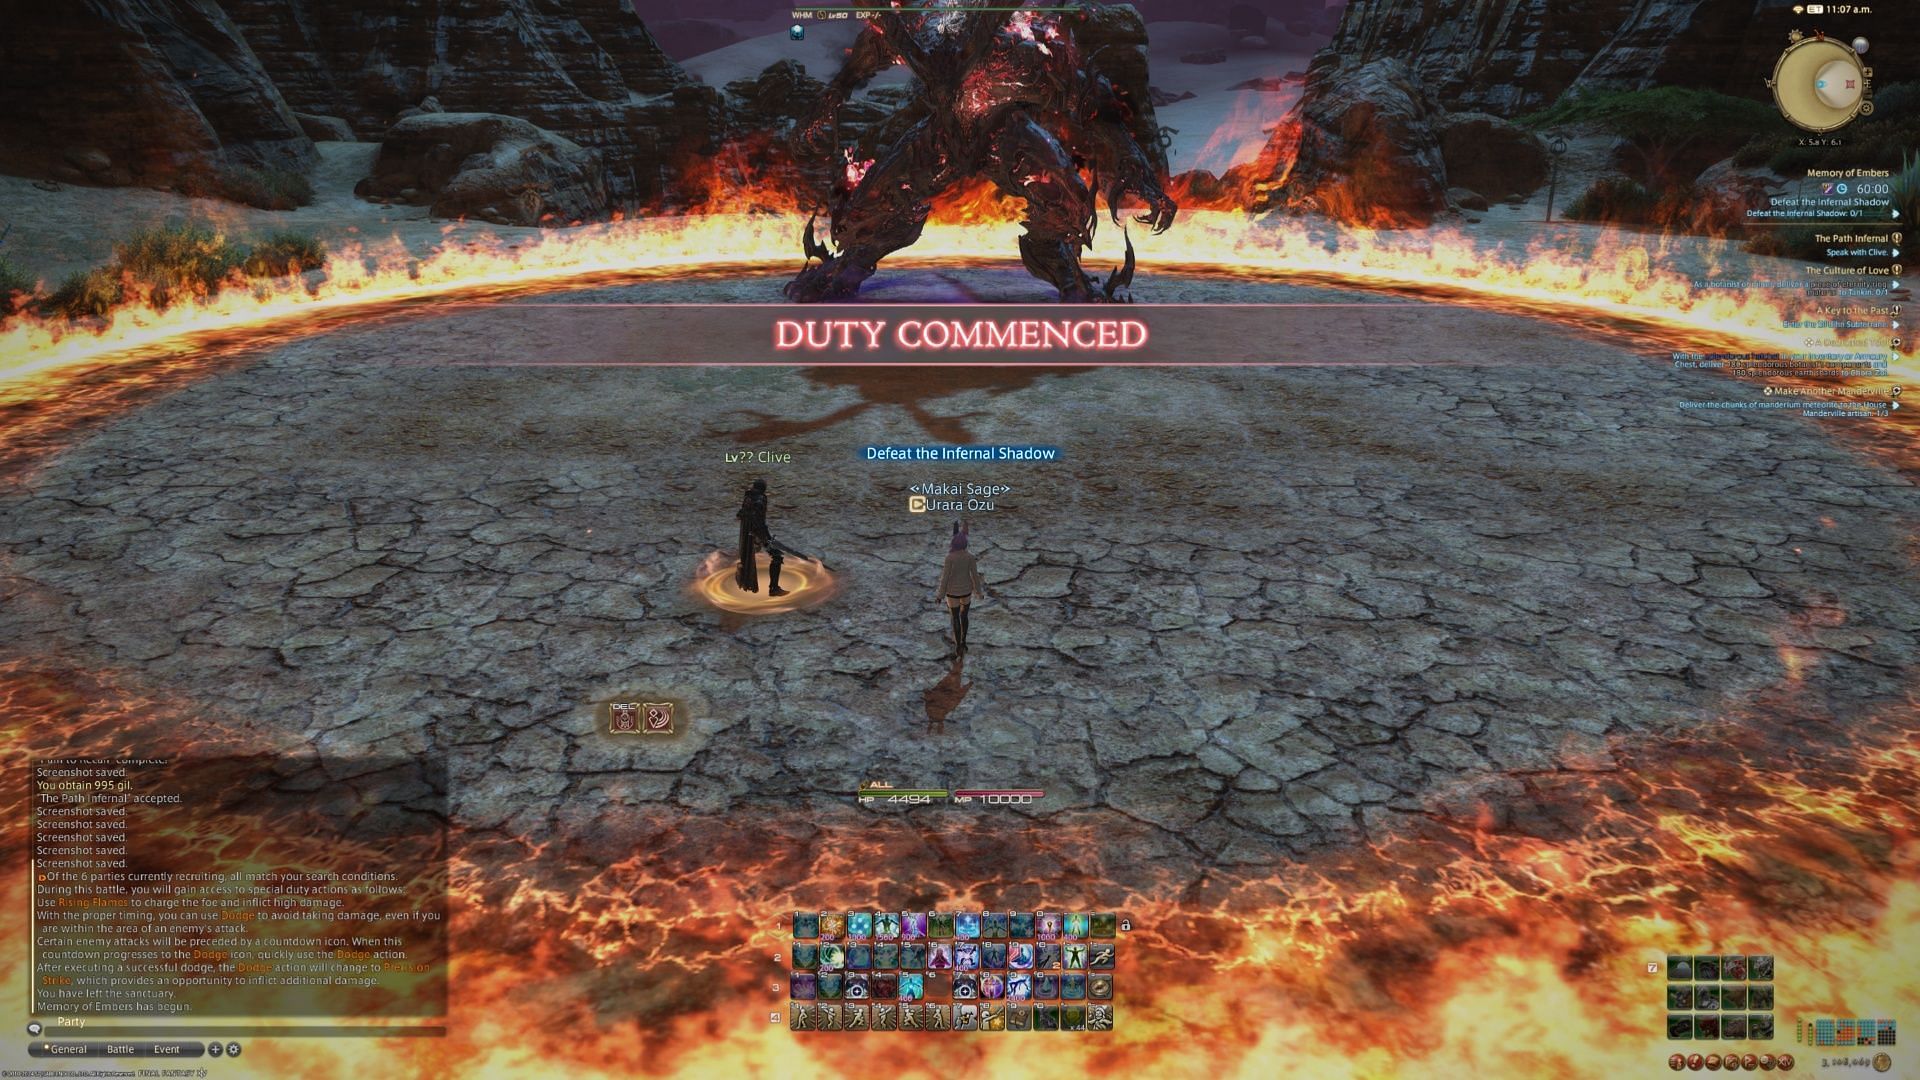 Most of this fight is quite easy - avoid AOEs, and counter-hit when you can (Image via Square Enix)